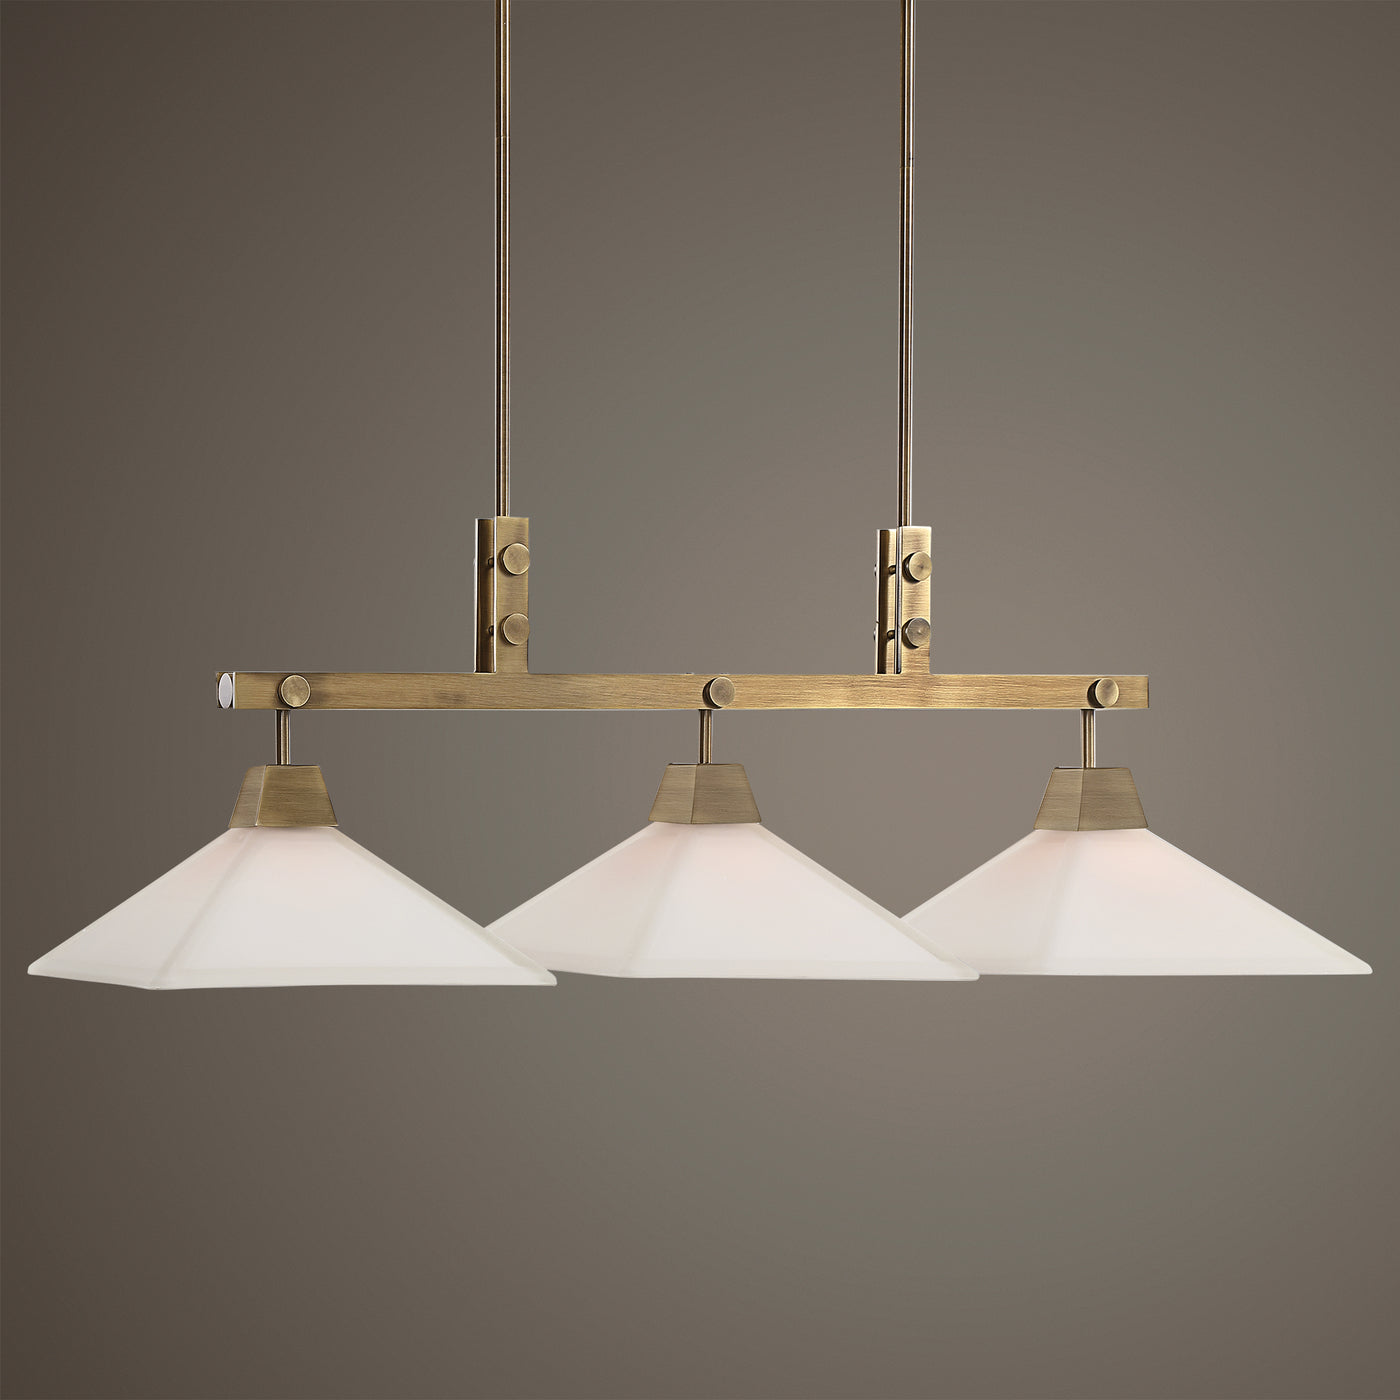 Enriched Industrial Style With A Hint Of Craftsman Lines Bring Together This Elegant Linear Chandelier Enhanced With An Ag...